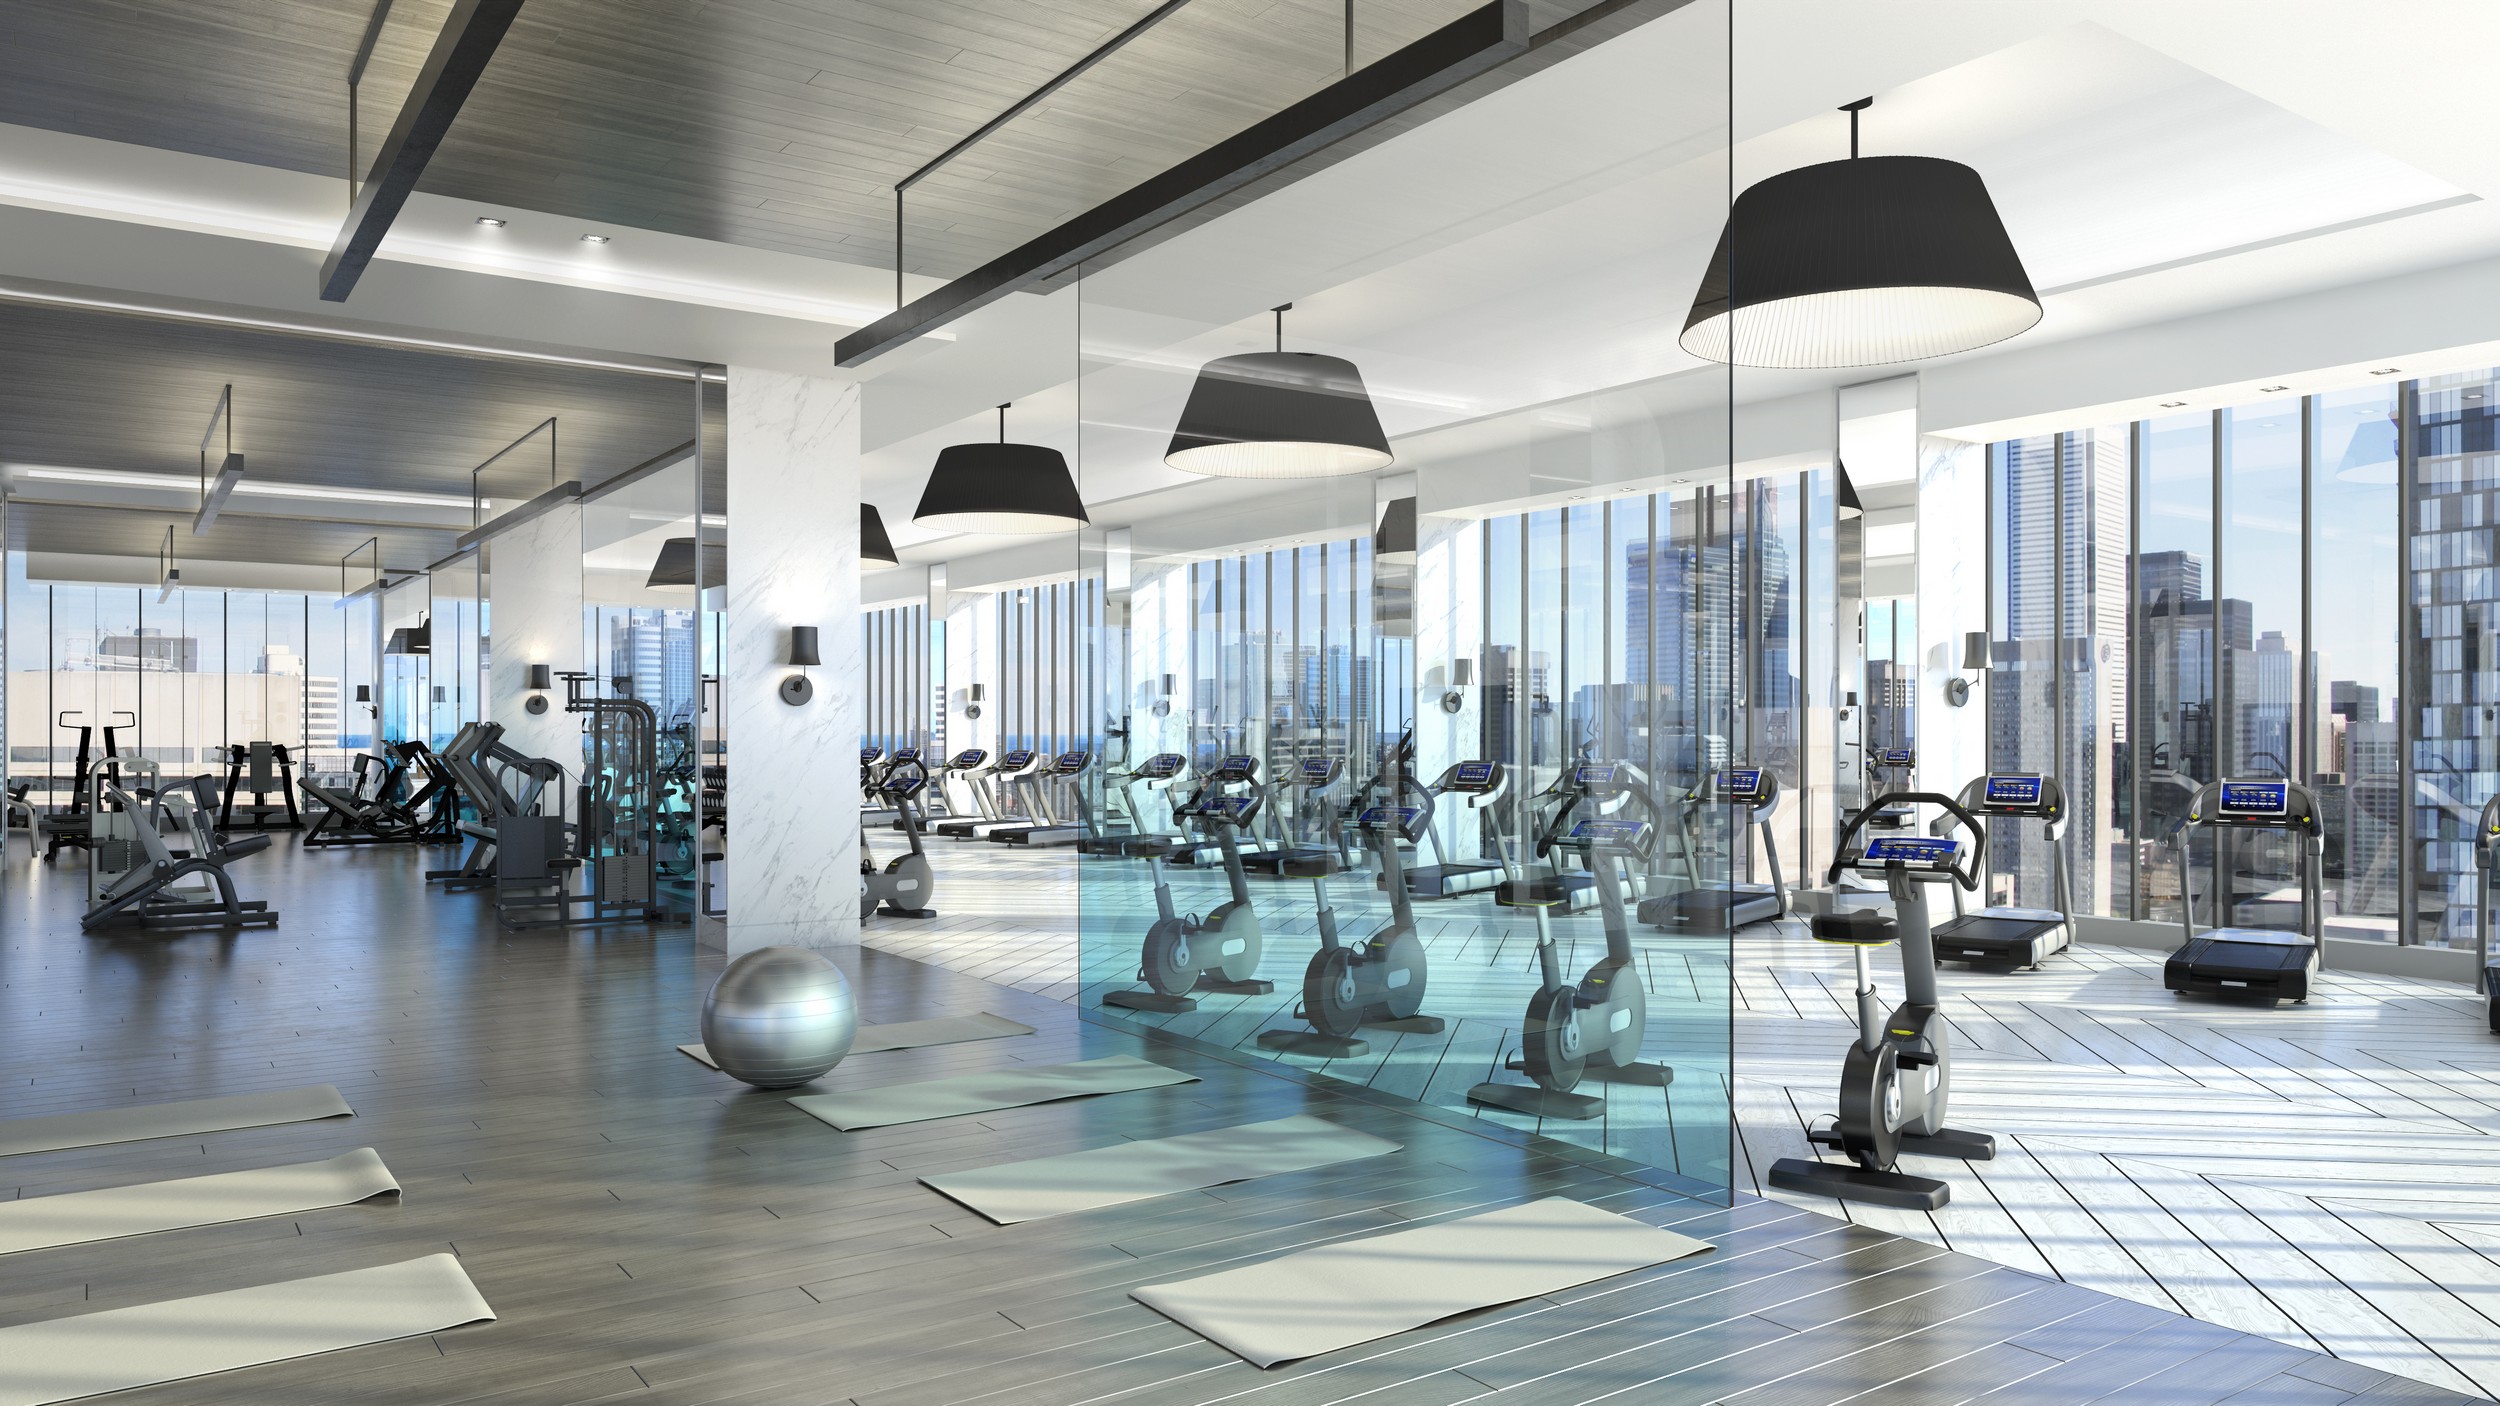 Gym with exercise bikes, balls, yoga mats and weights.